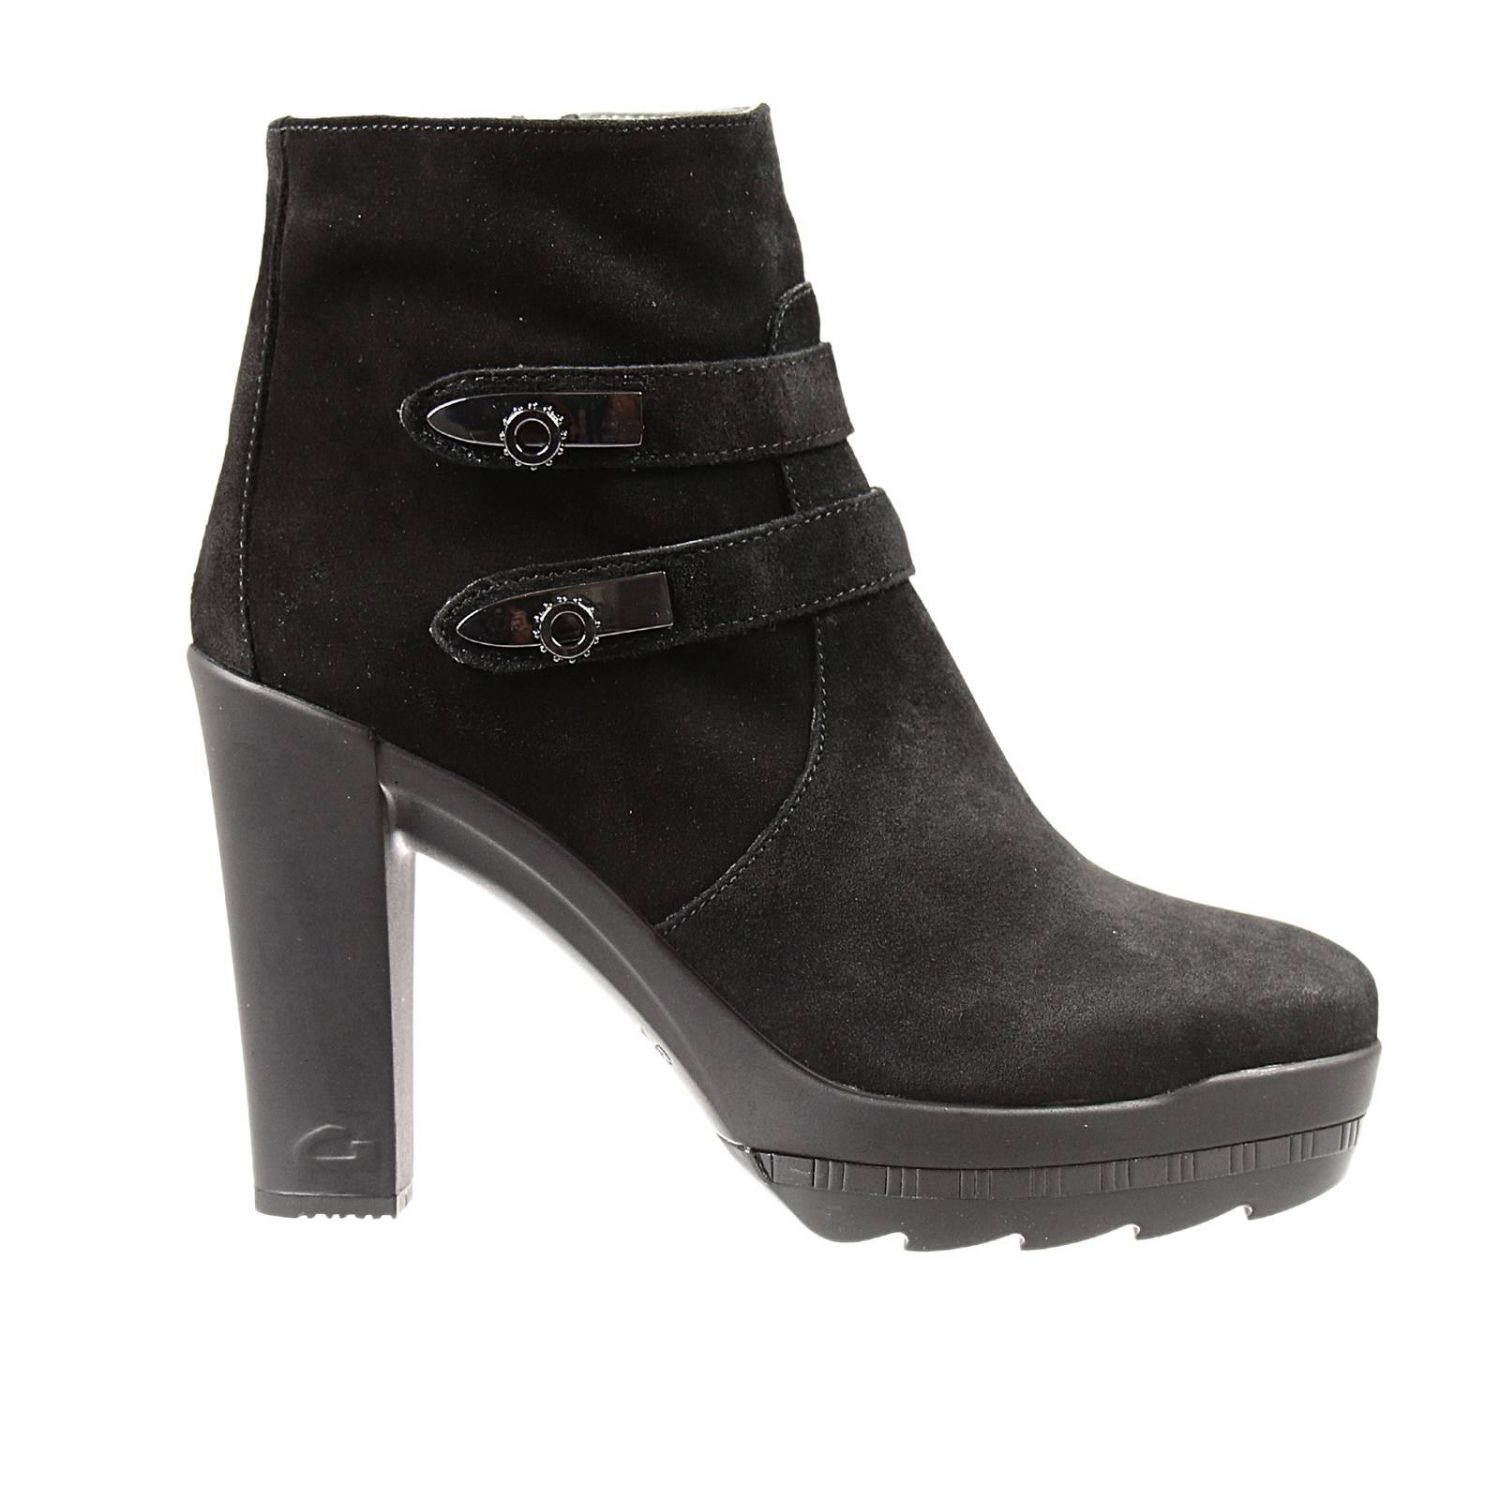 Guardiani Sport Outlet: KARINA 8+2 HEEL LOW BOOTS SUEDE | Heeled ...